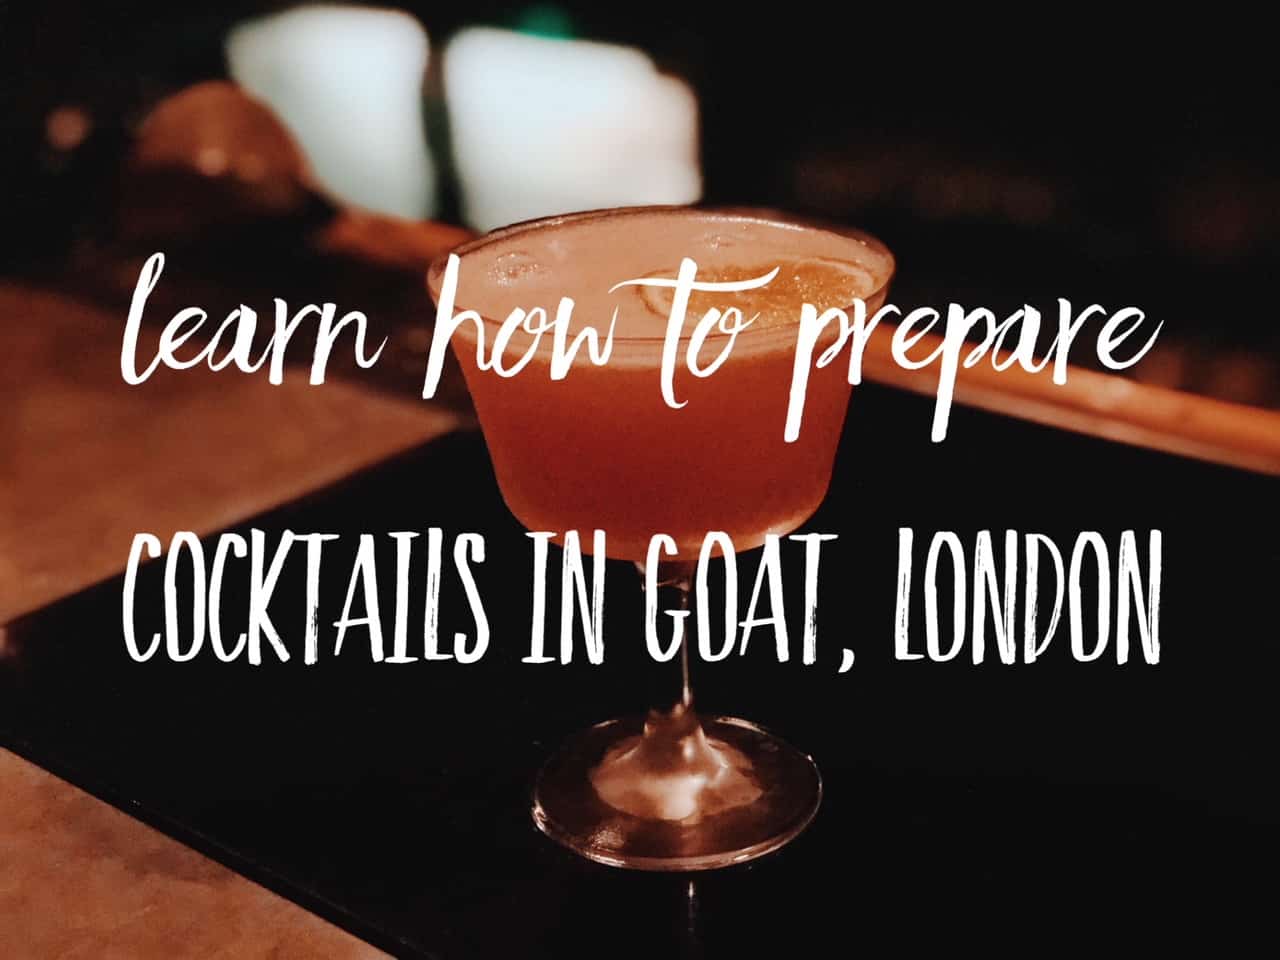 Hemingway inspired cocktail making class in a secret bar in London